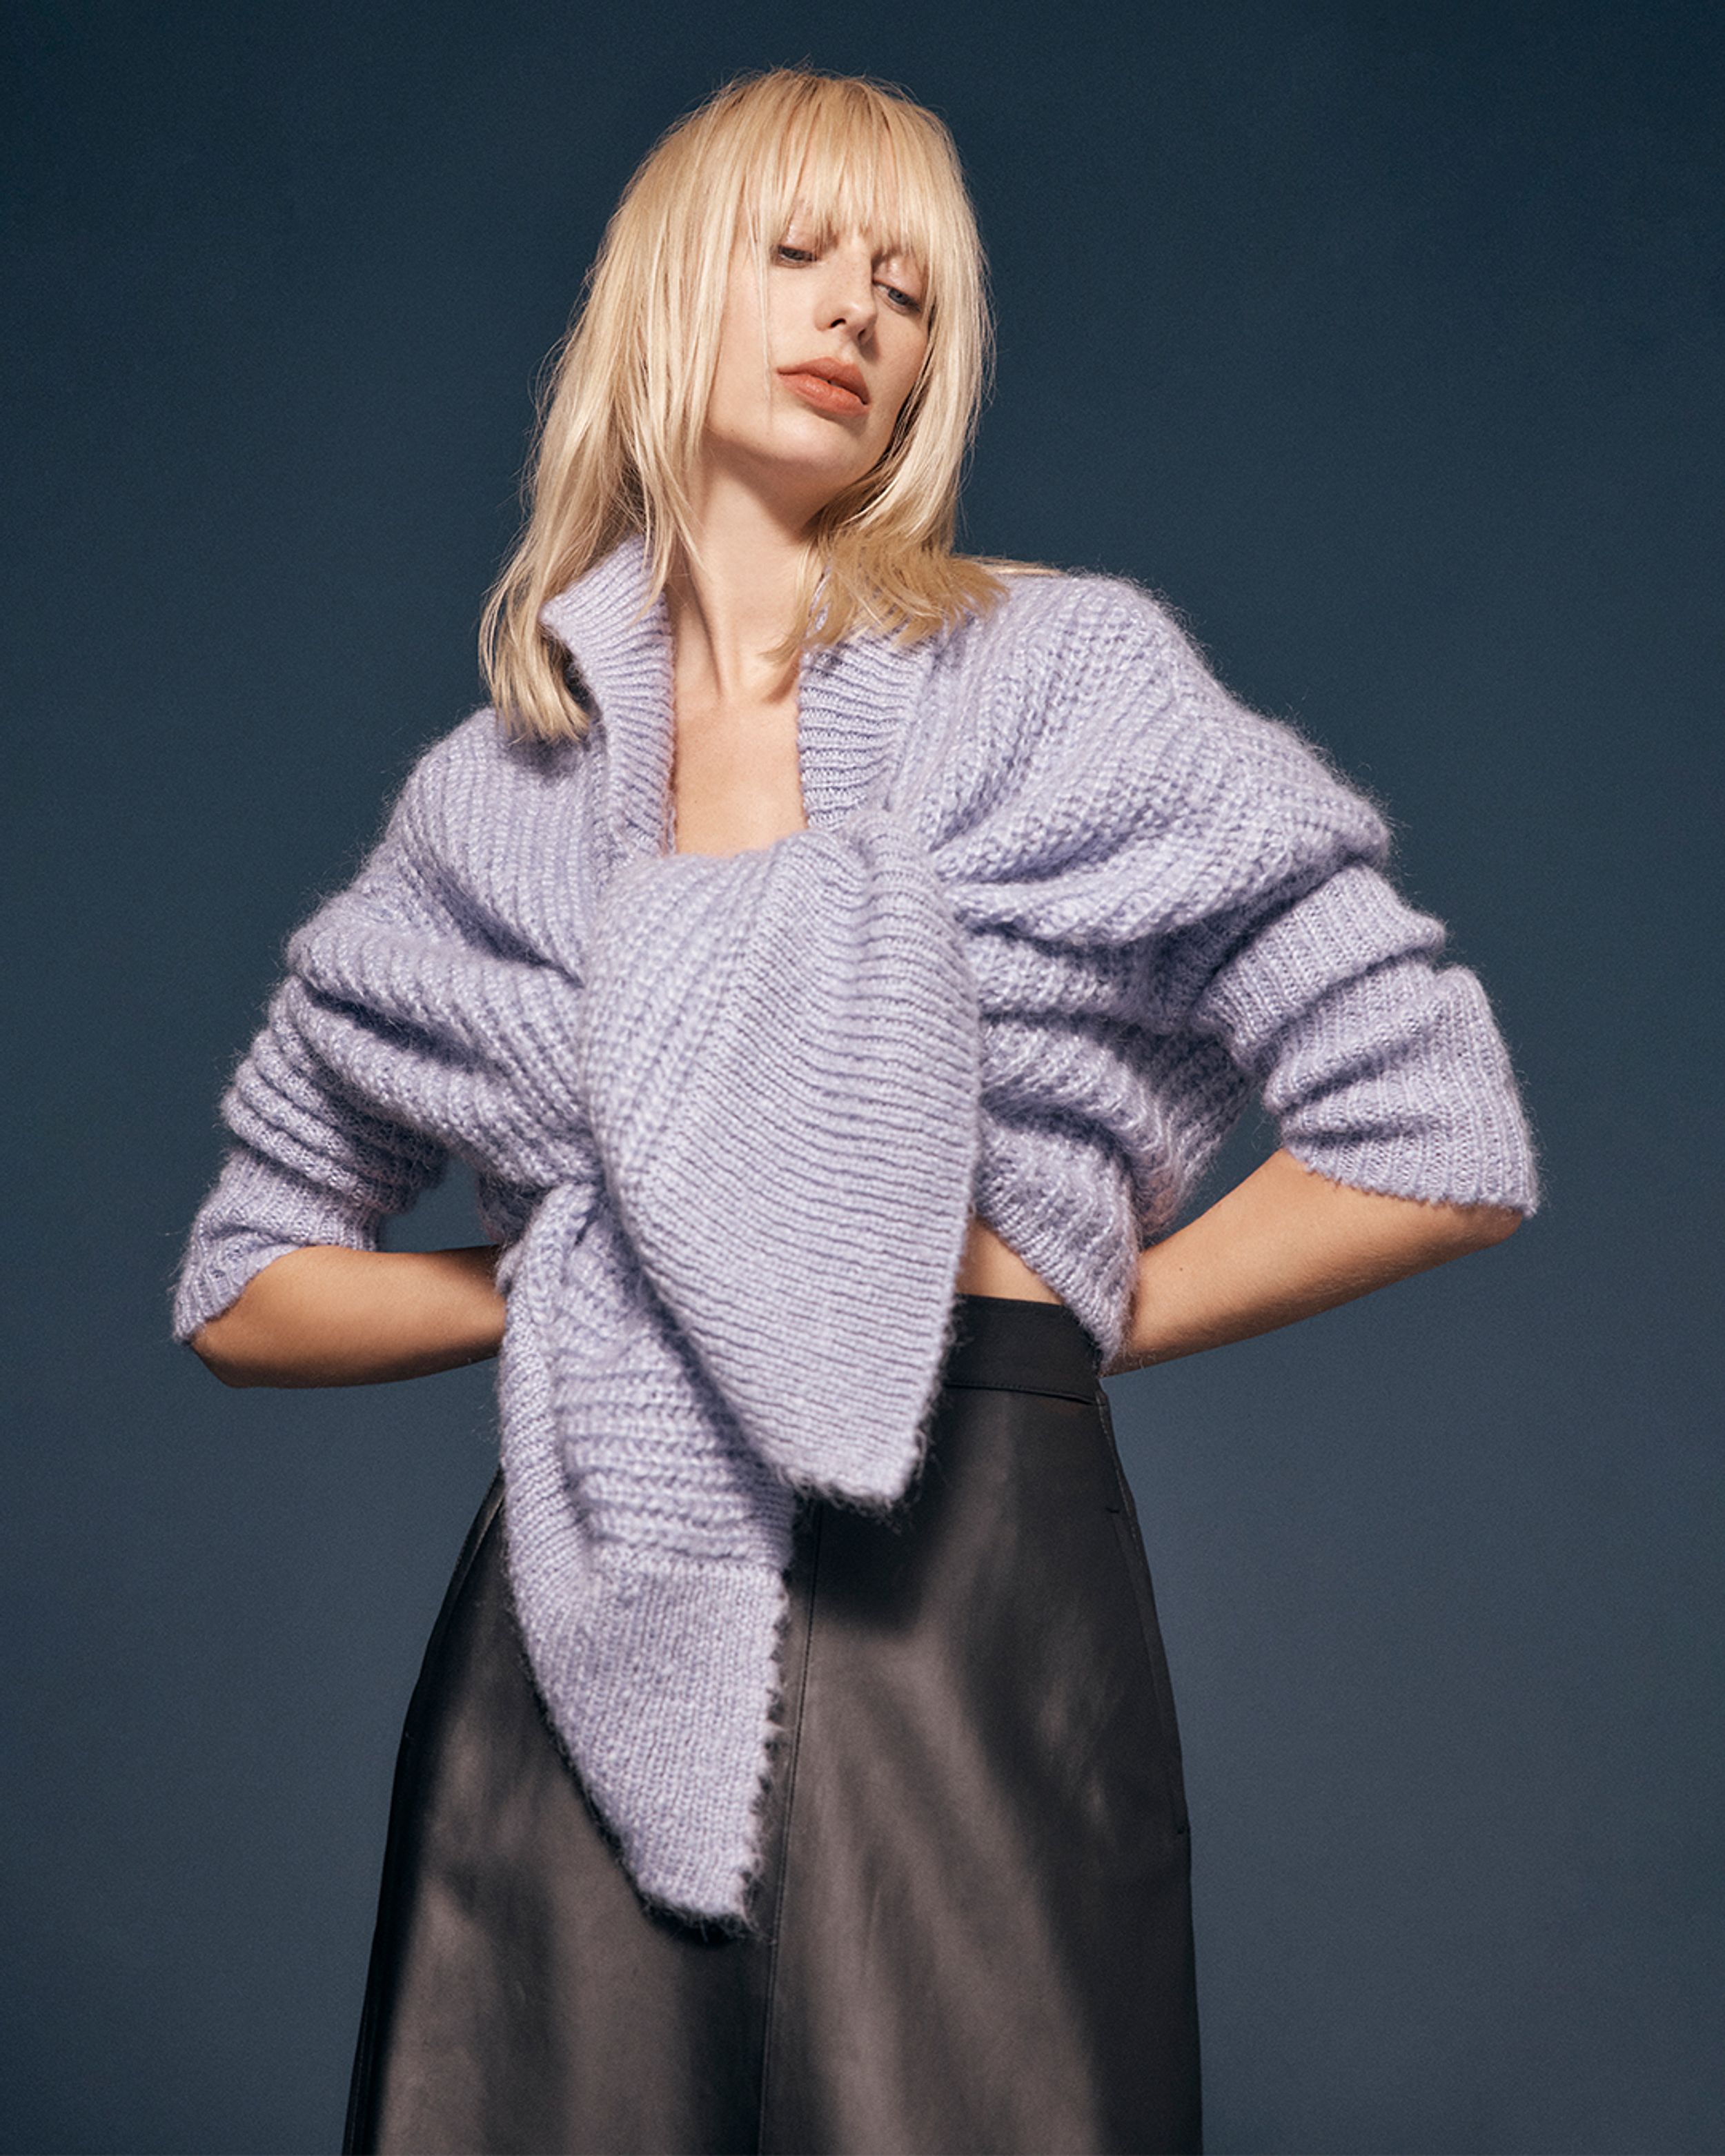 Blonde model with hands on hips wearing a lilac chunky knit cardigan